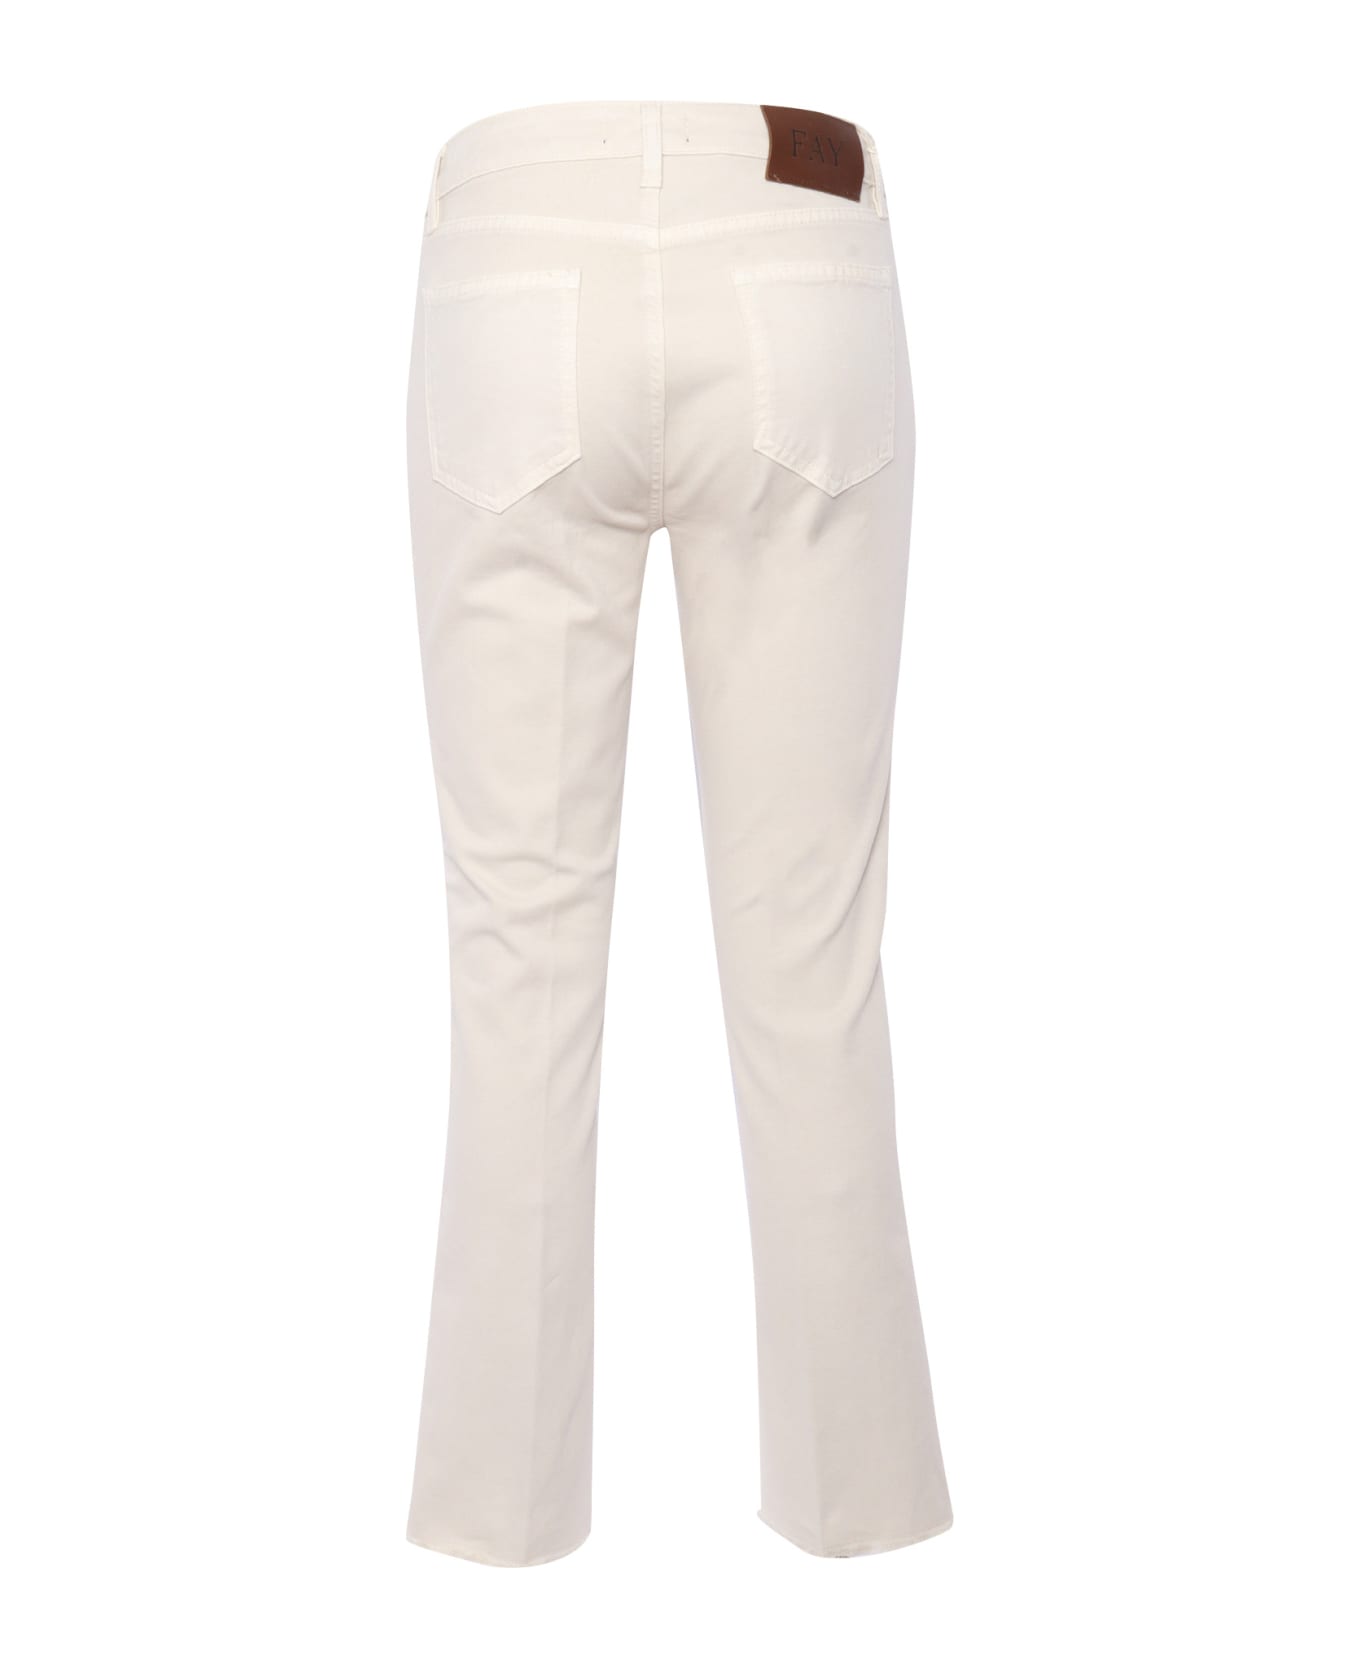 Fay Cream Colored Trousers - WHITE ボトムス